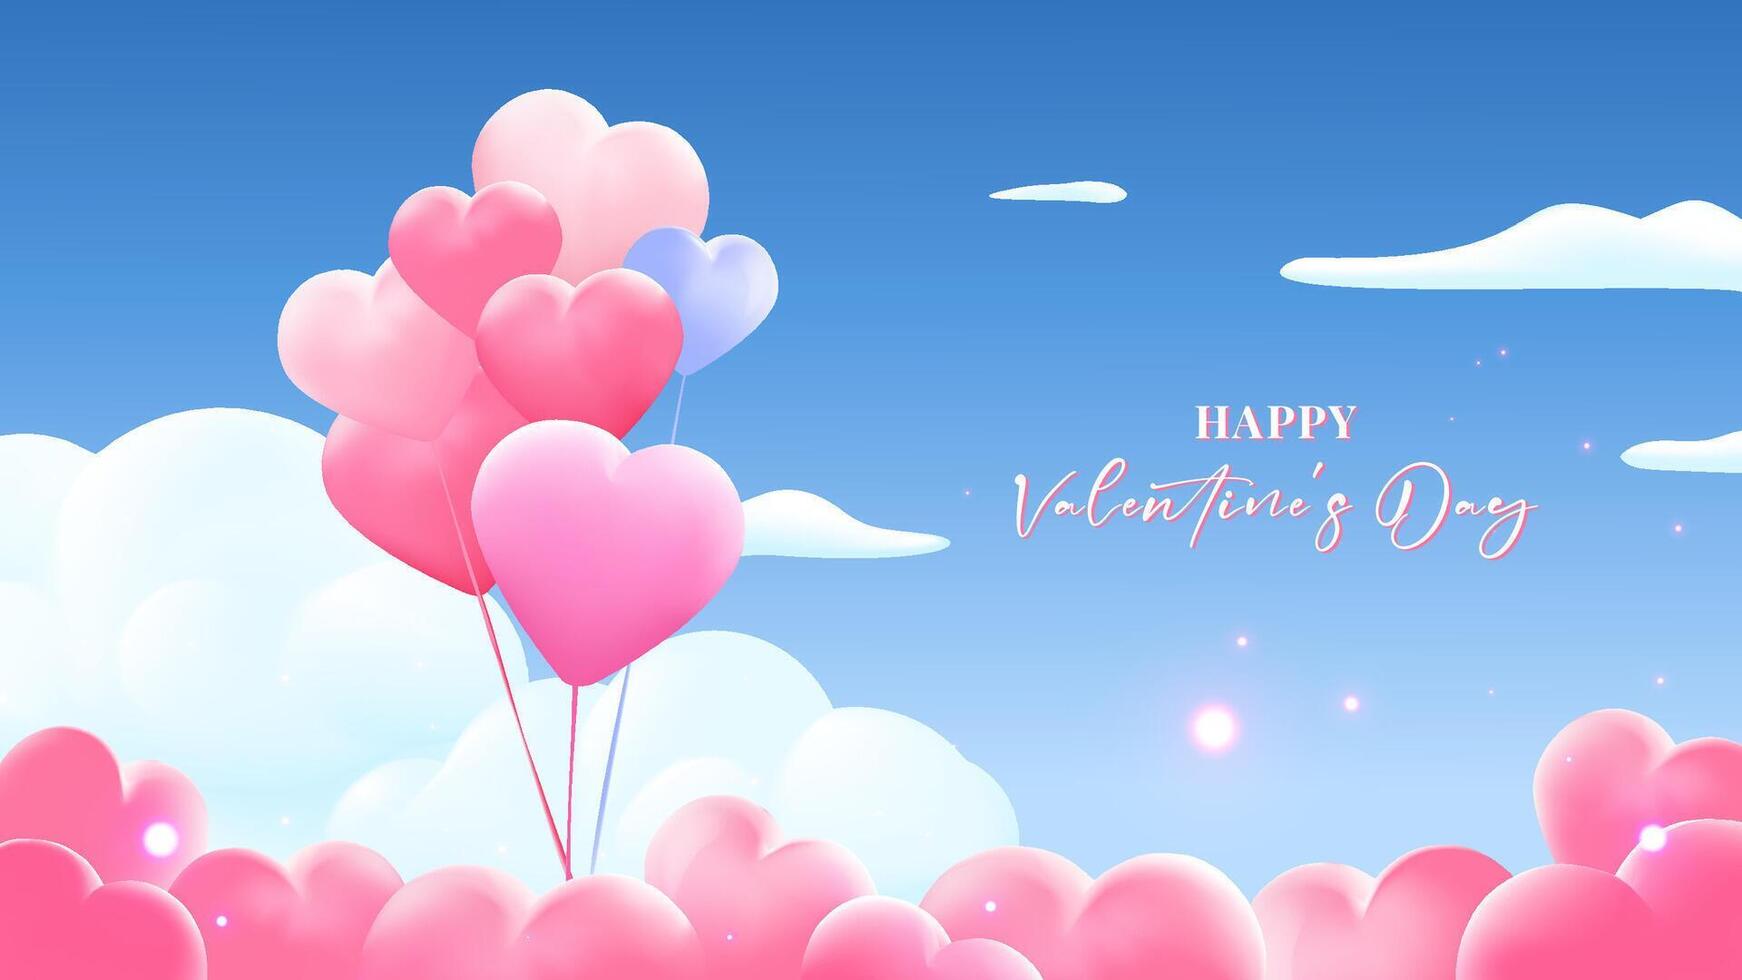 Valentine's Day vector illustration design a love balloon in the blue sky